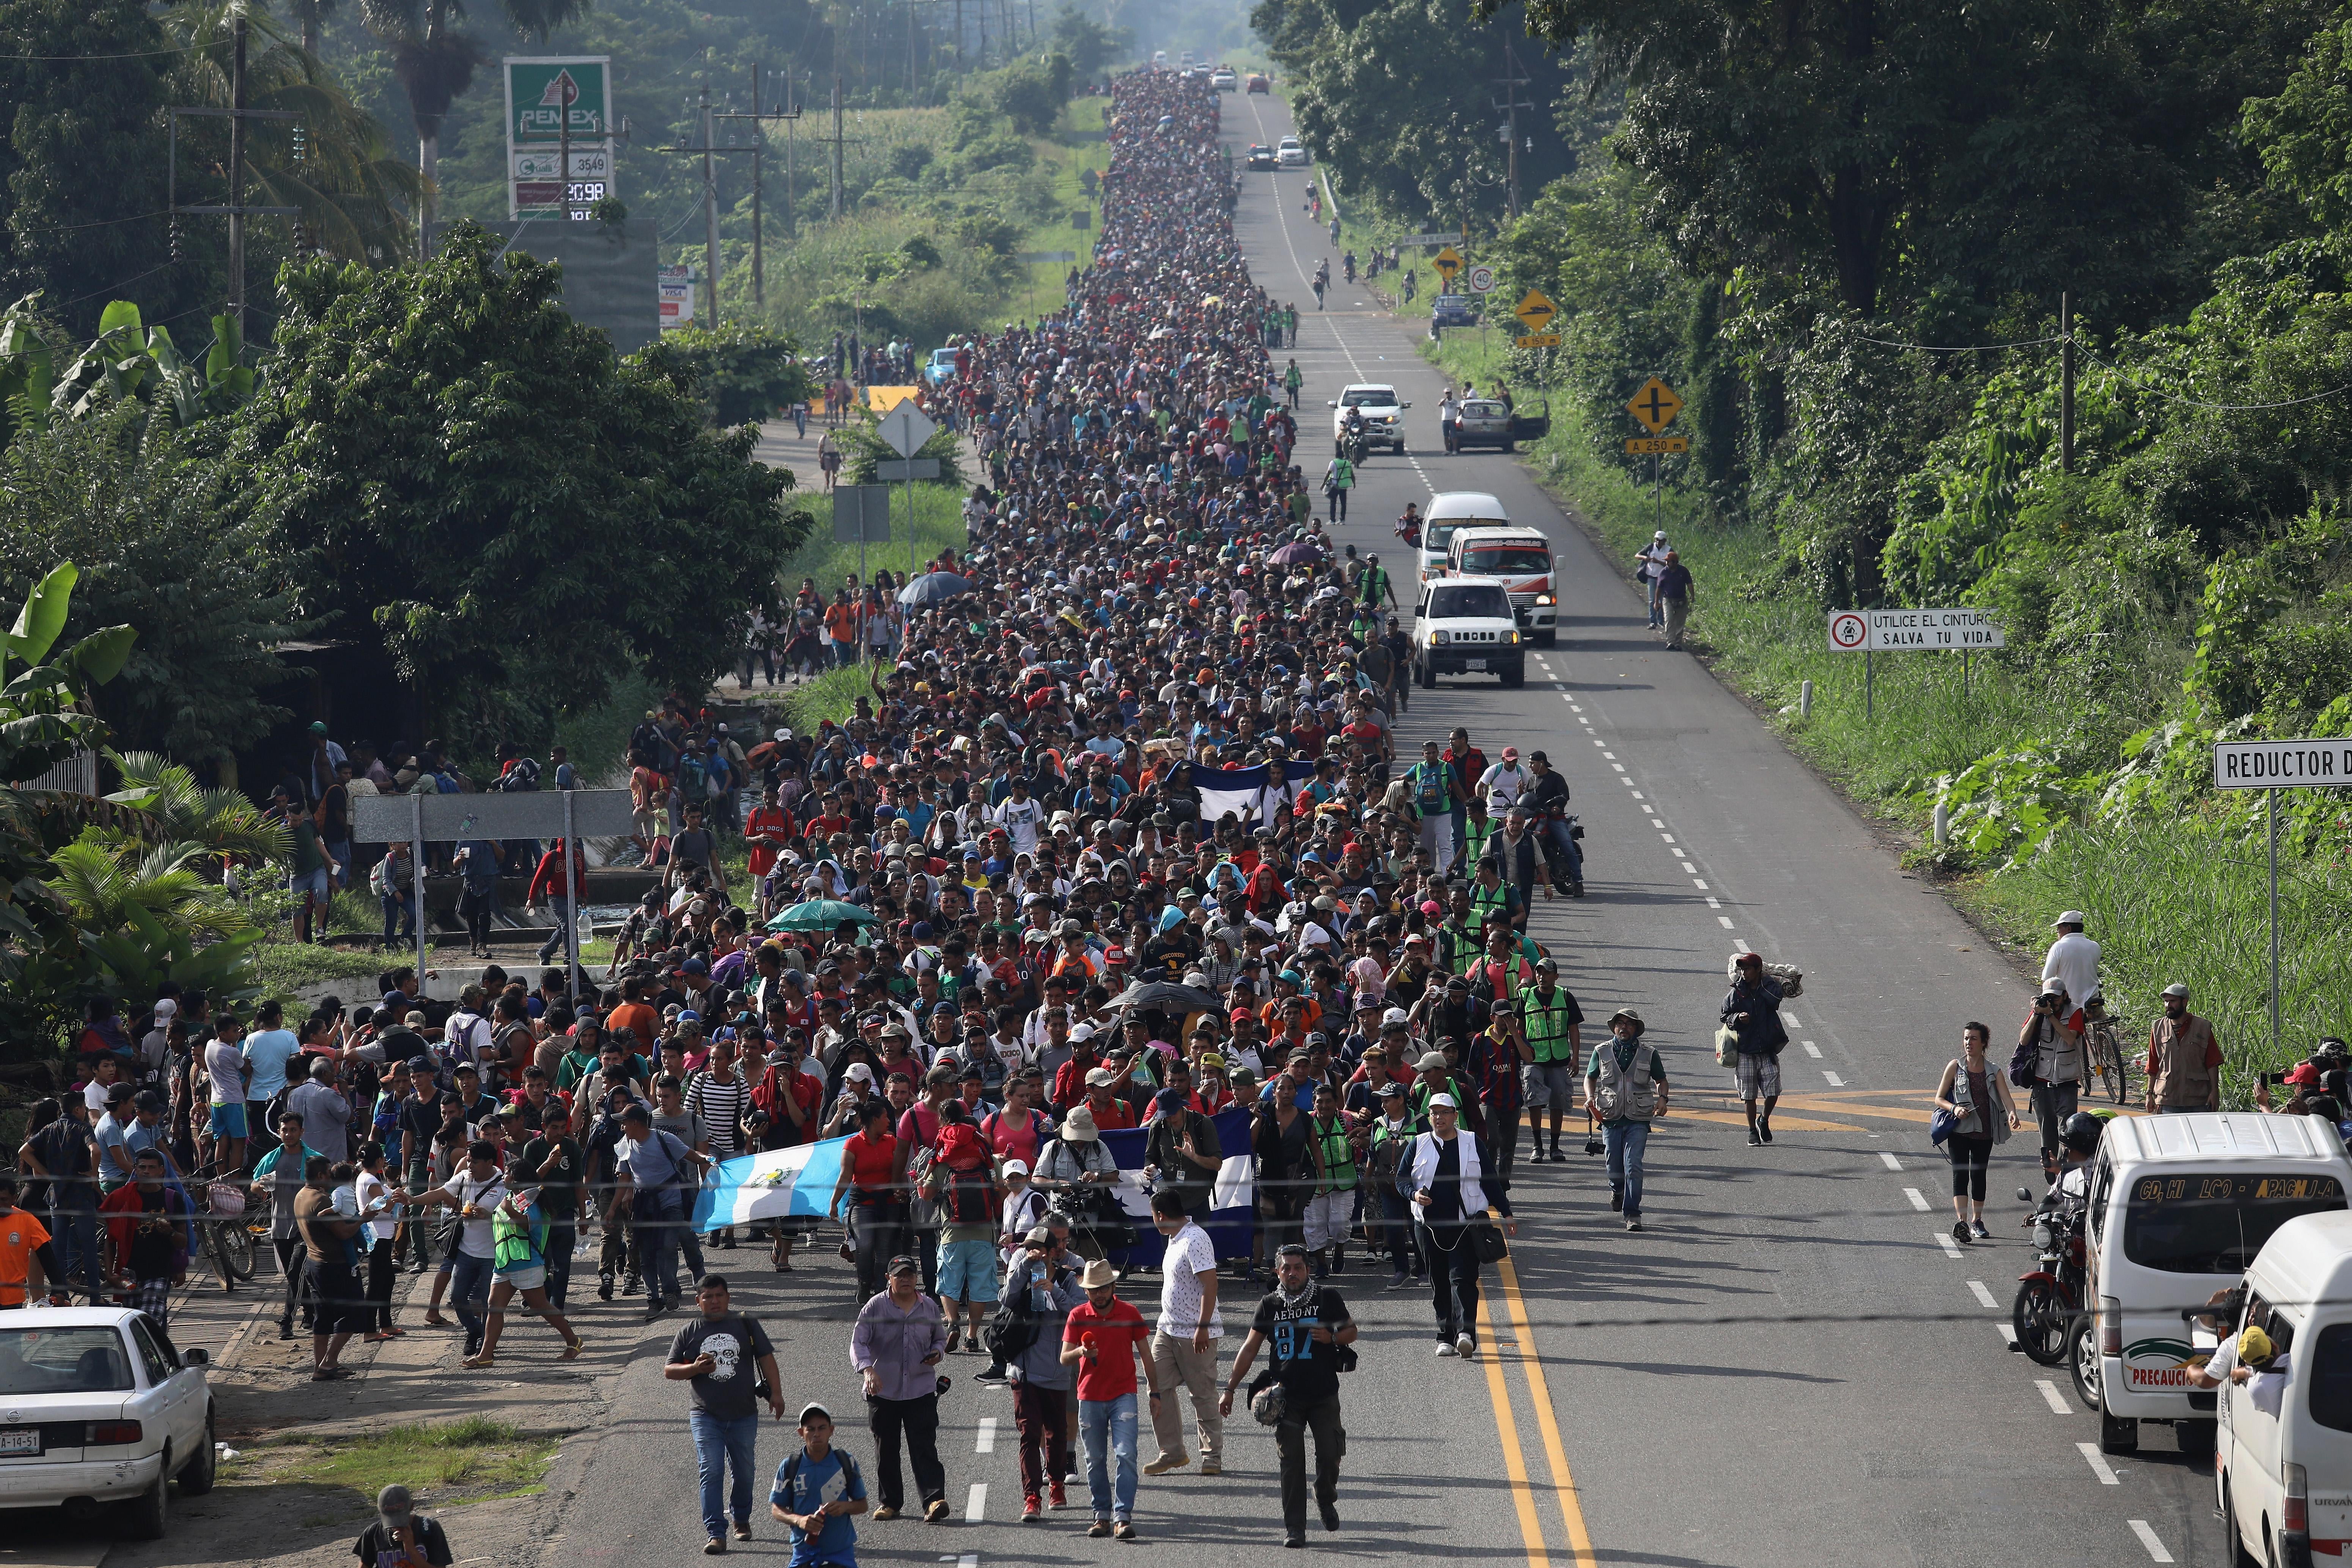 A migrant caravan, which has grown into the thousands, walks into the interior of Mexico after crossing the Guatemalan border on October 21, 2018 near Ciudad Hidalgo, Mexico.